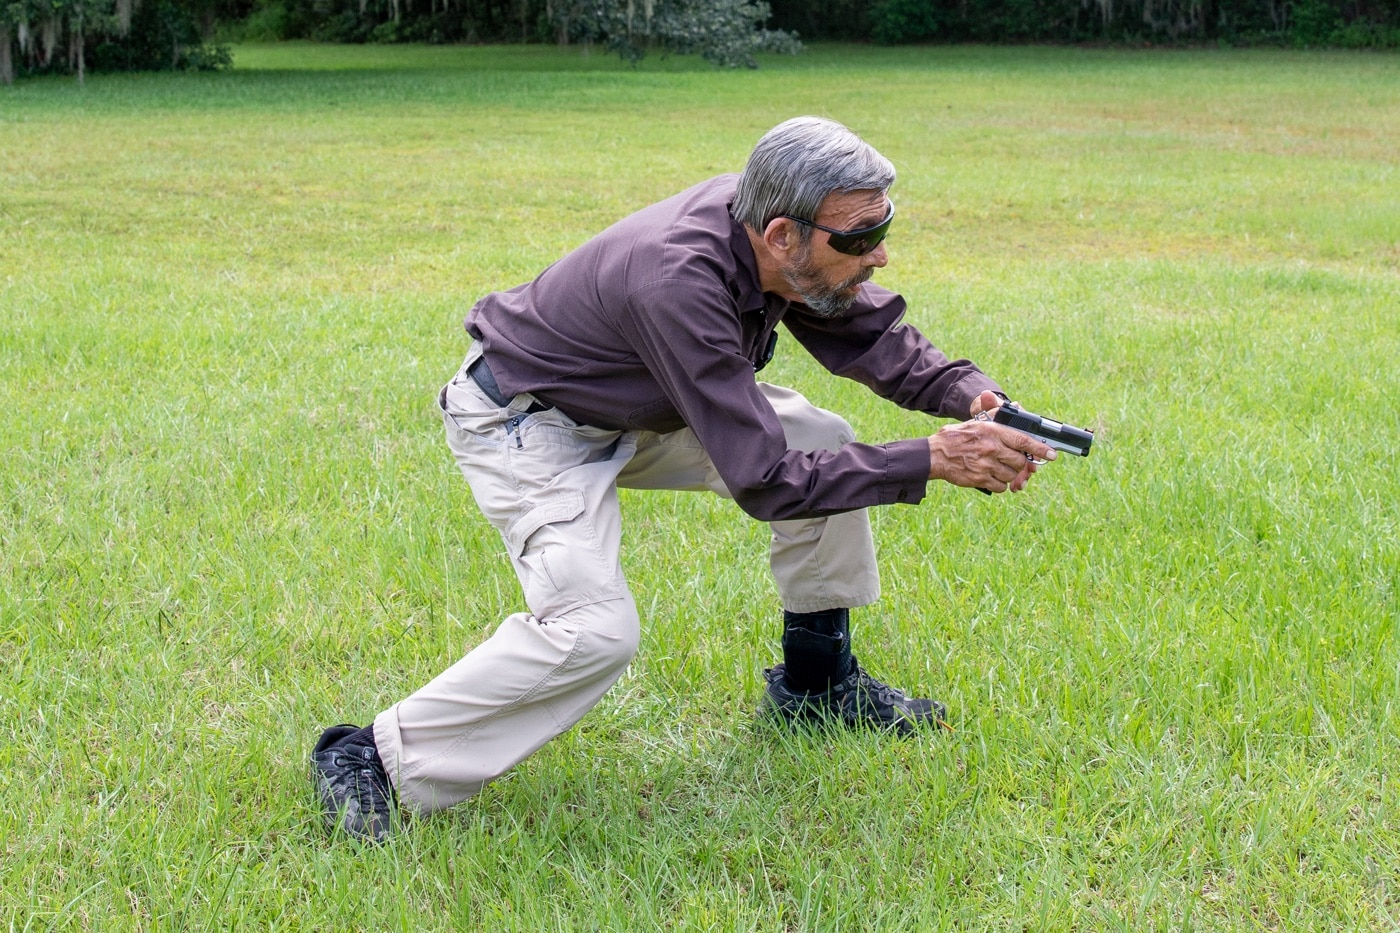 crouching during draw from ankle holster